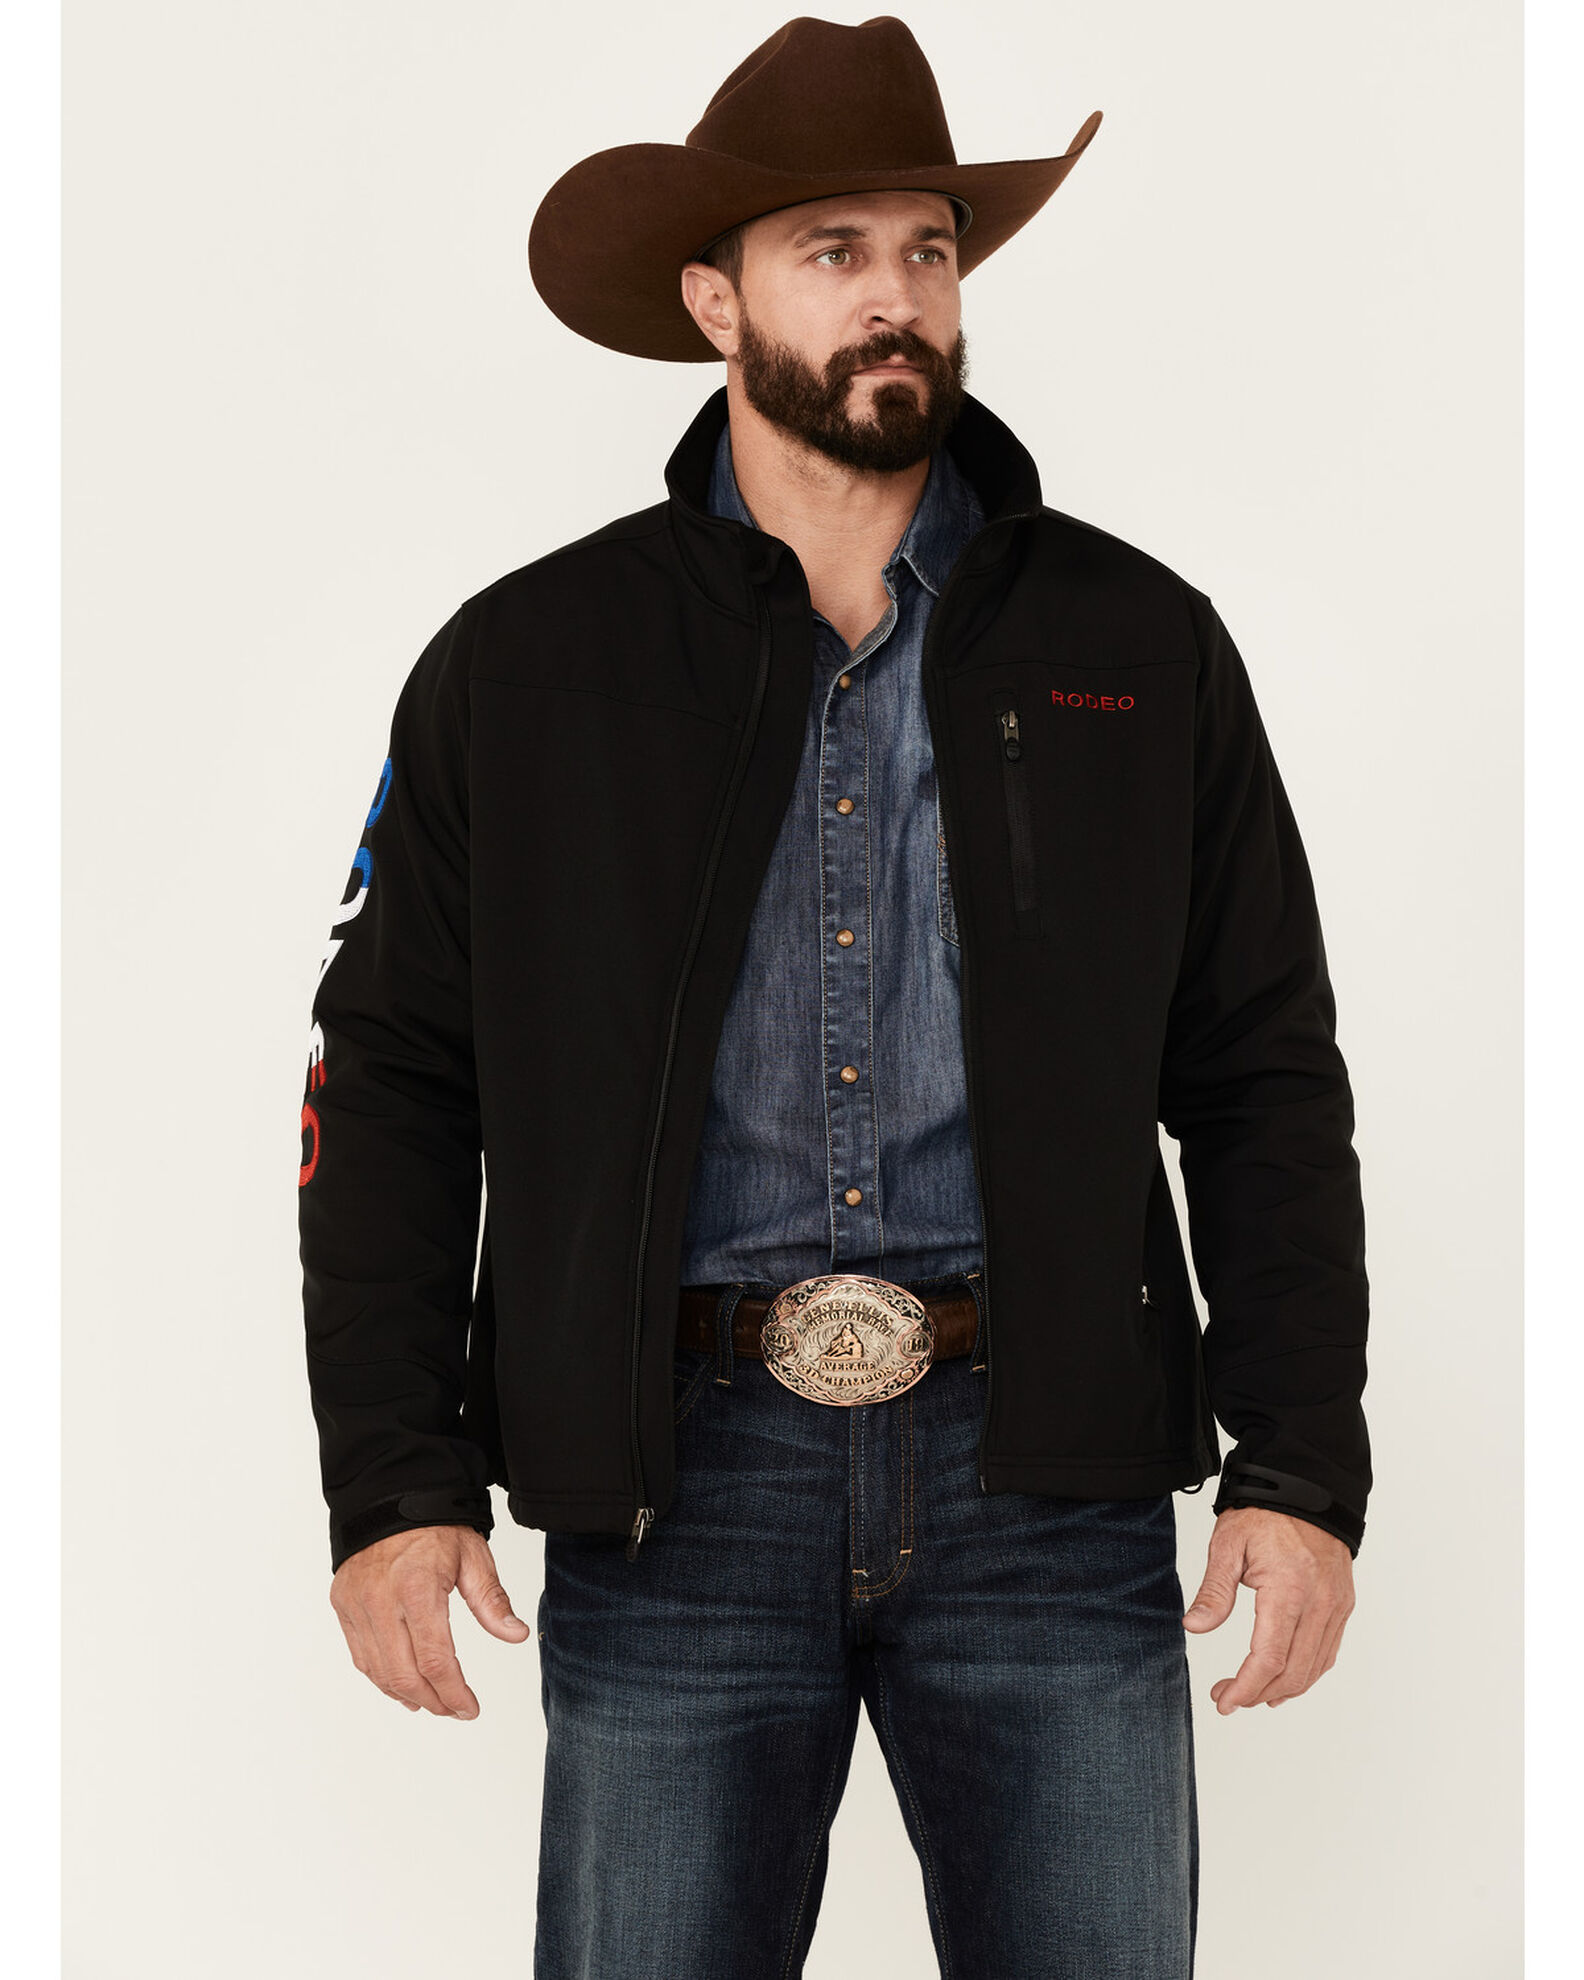 Rodeo Clothing Men's Embroidered USA Logo Zip-Front Softshell Jacket